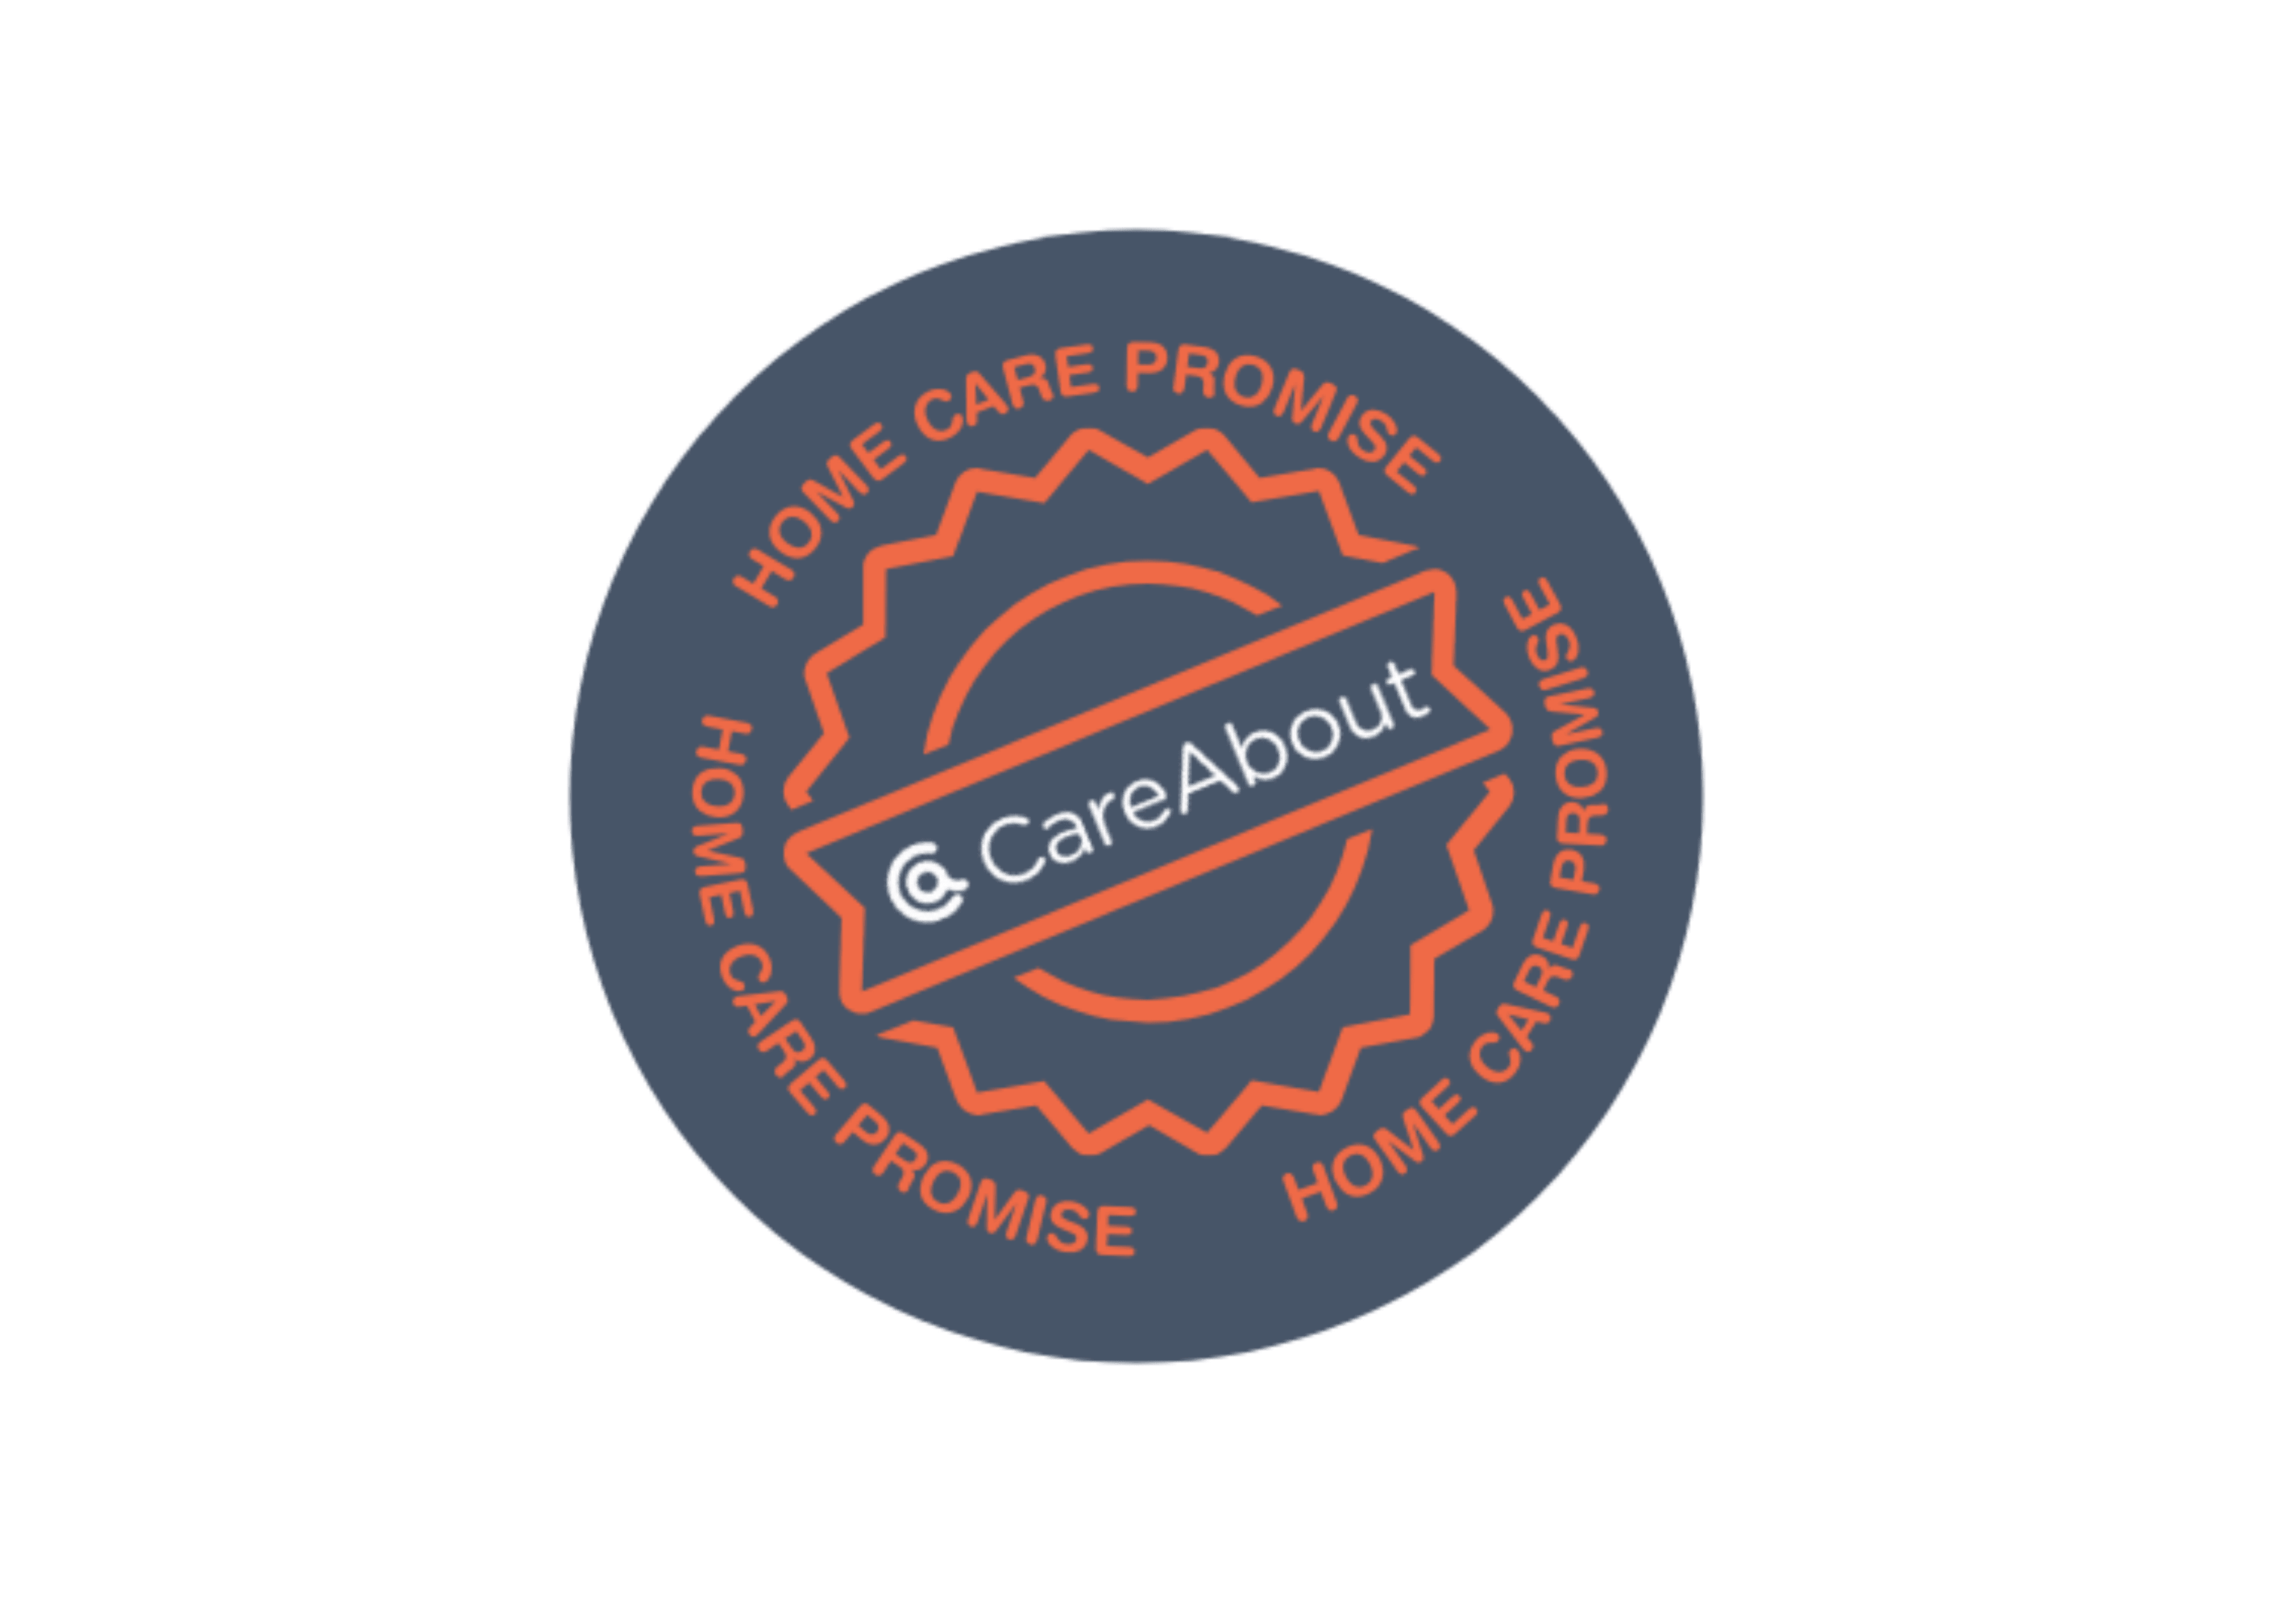 CareAbout Home Care Promise 